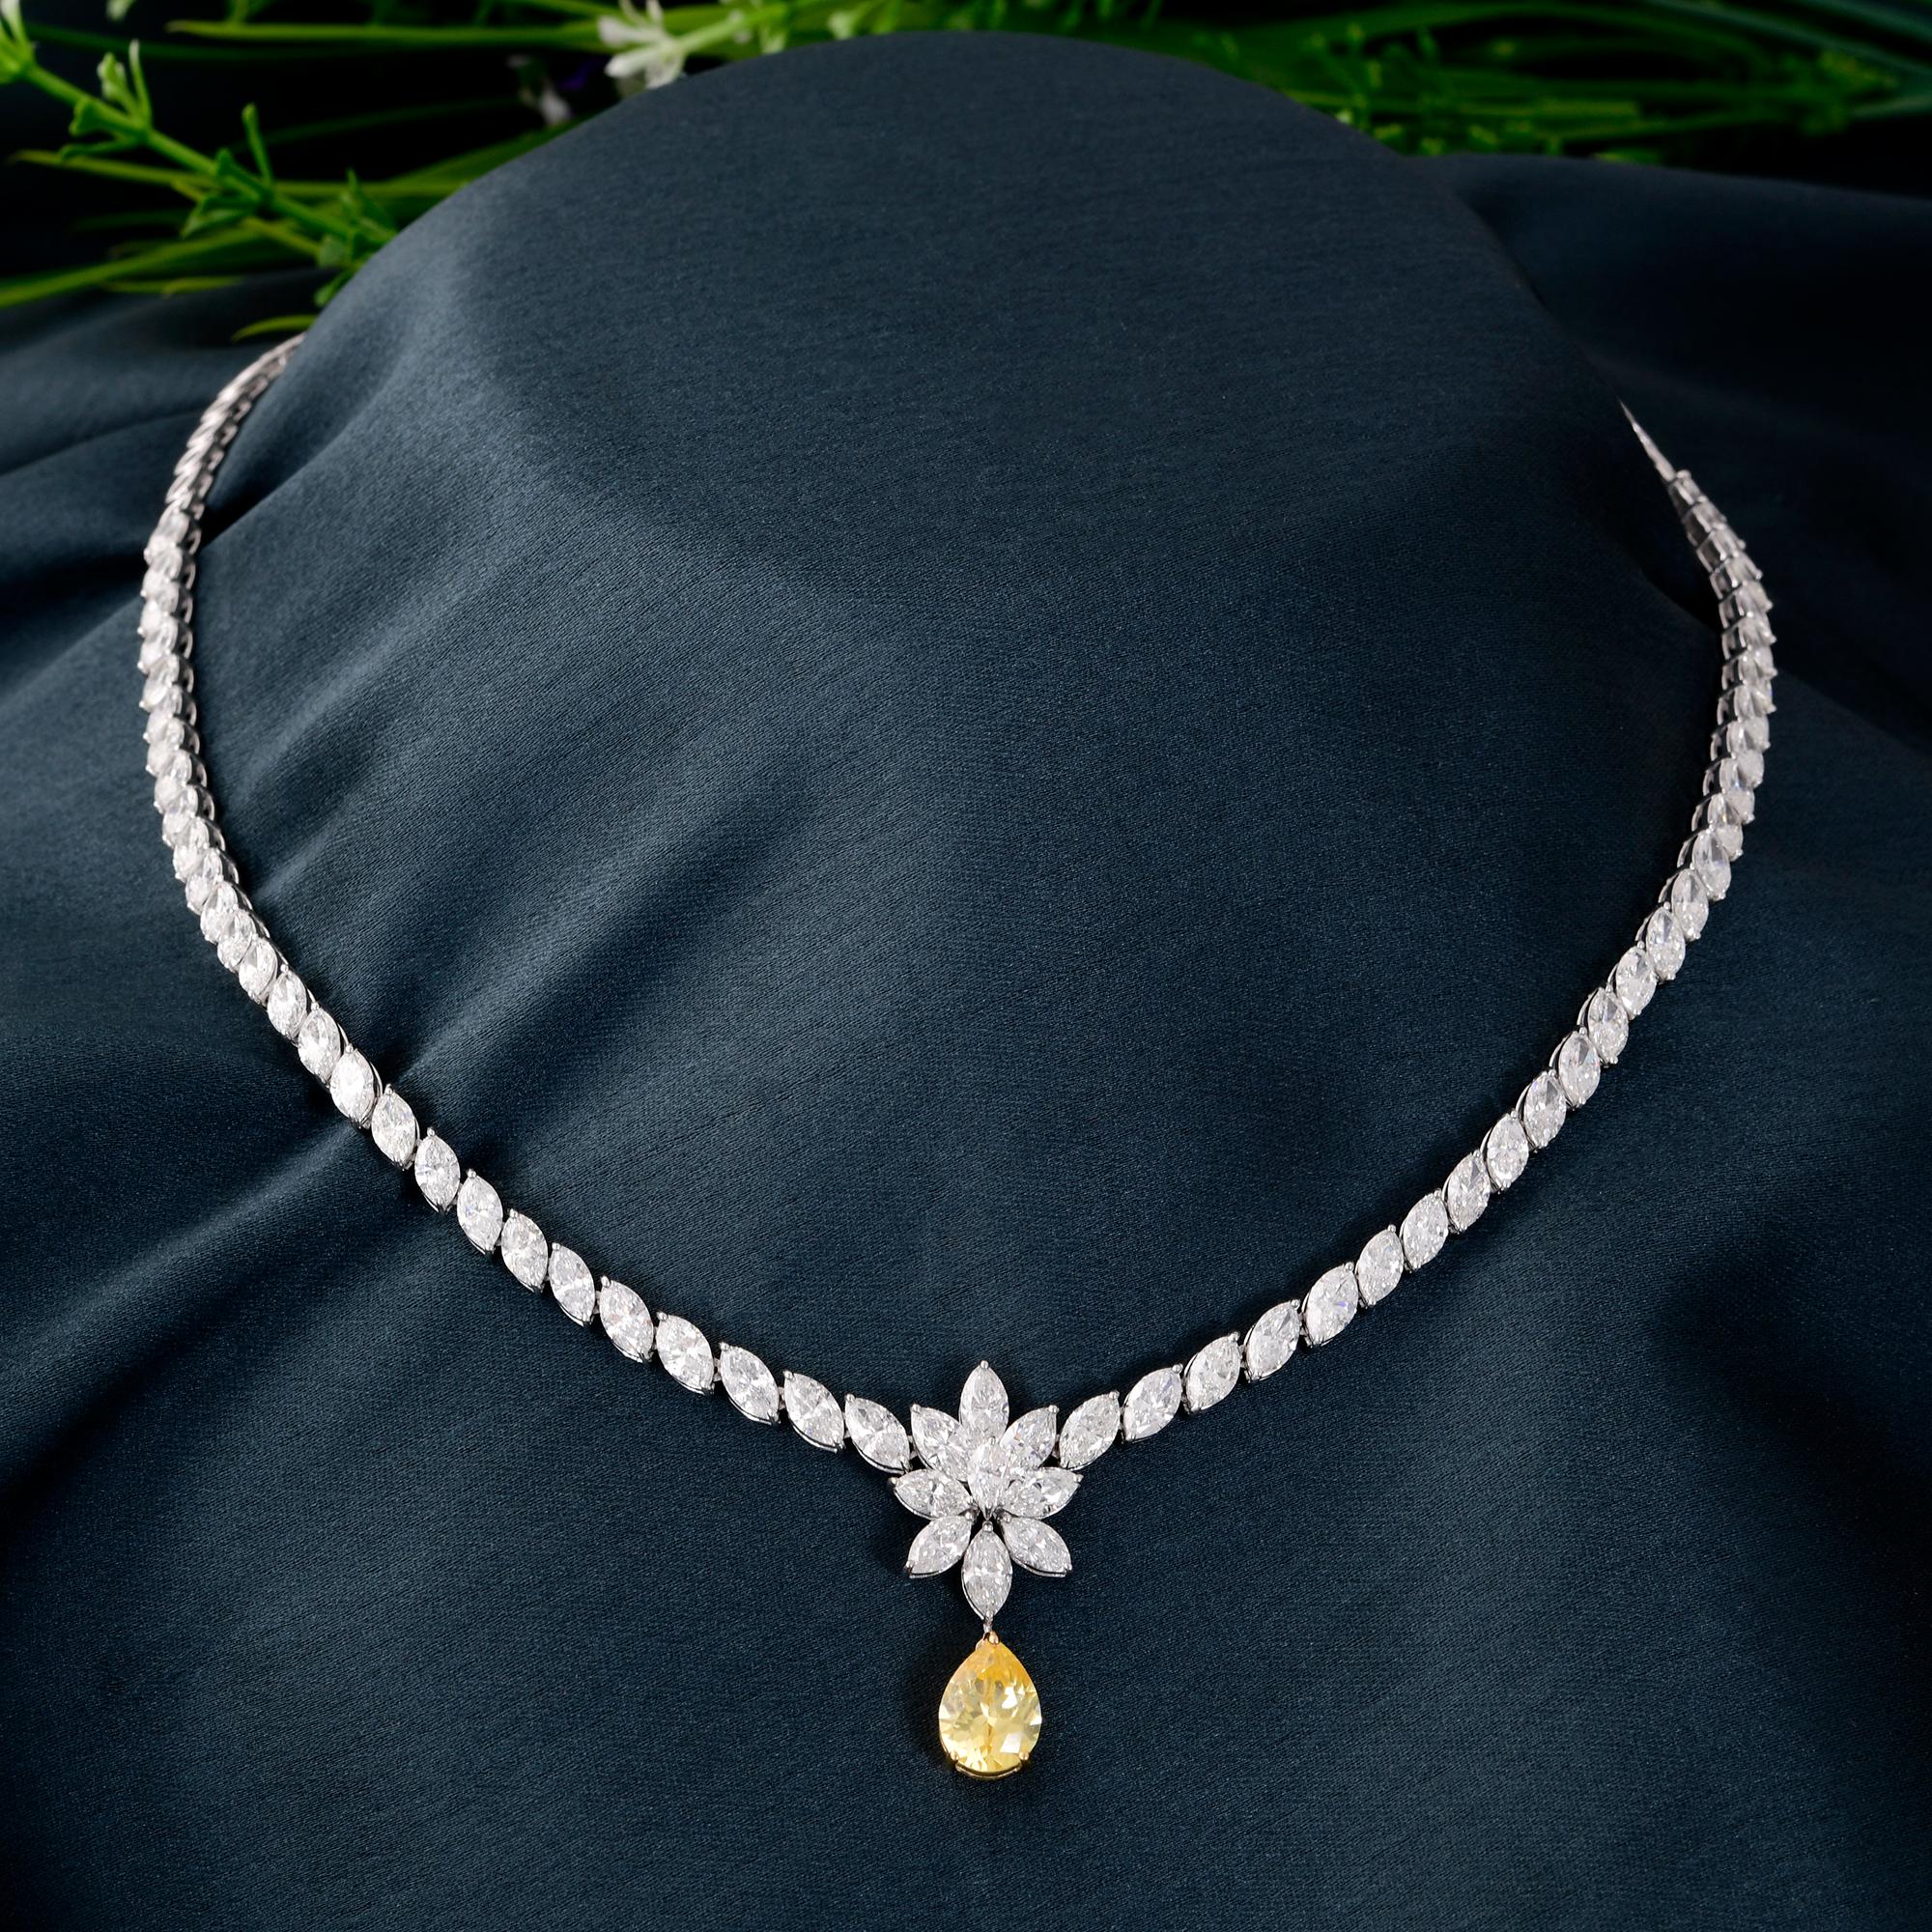 Marquise Cut Pear Gemstone Necklace Marquise Diamond 18 Karat White Gold Handmade Jewelry For Sale